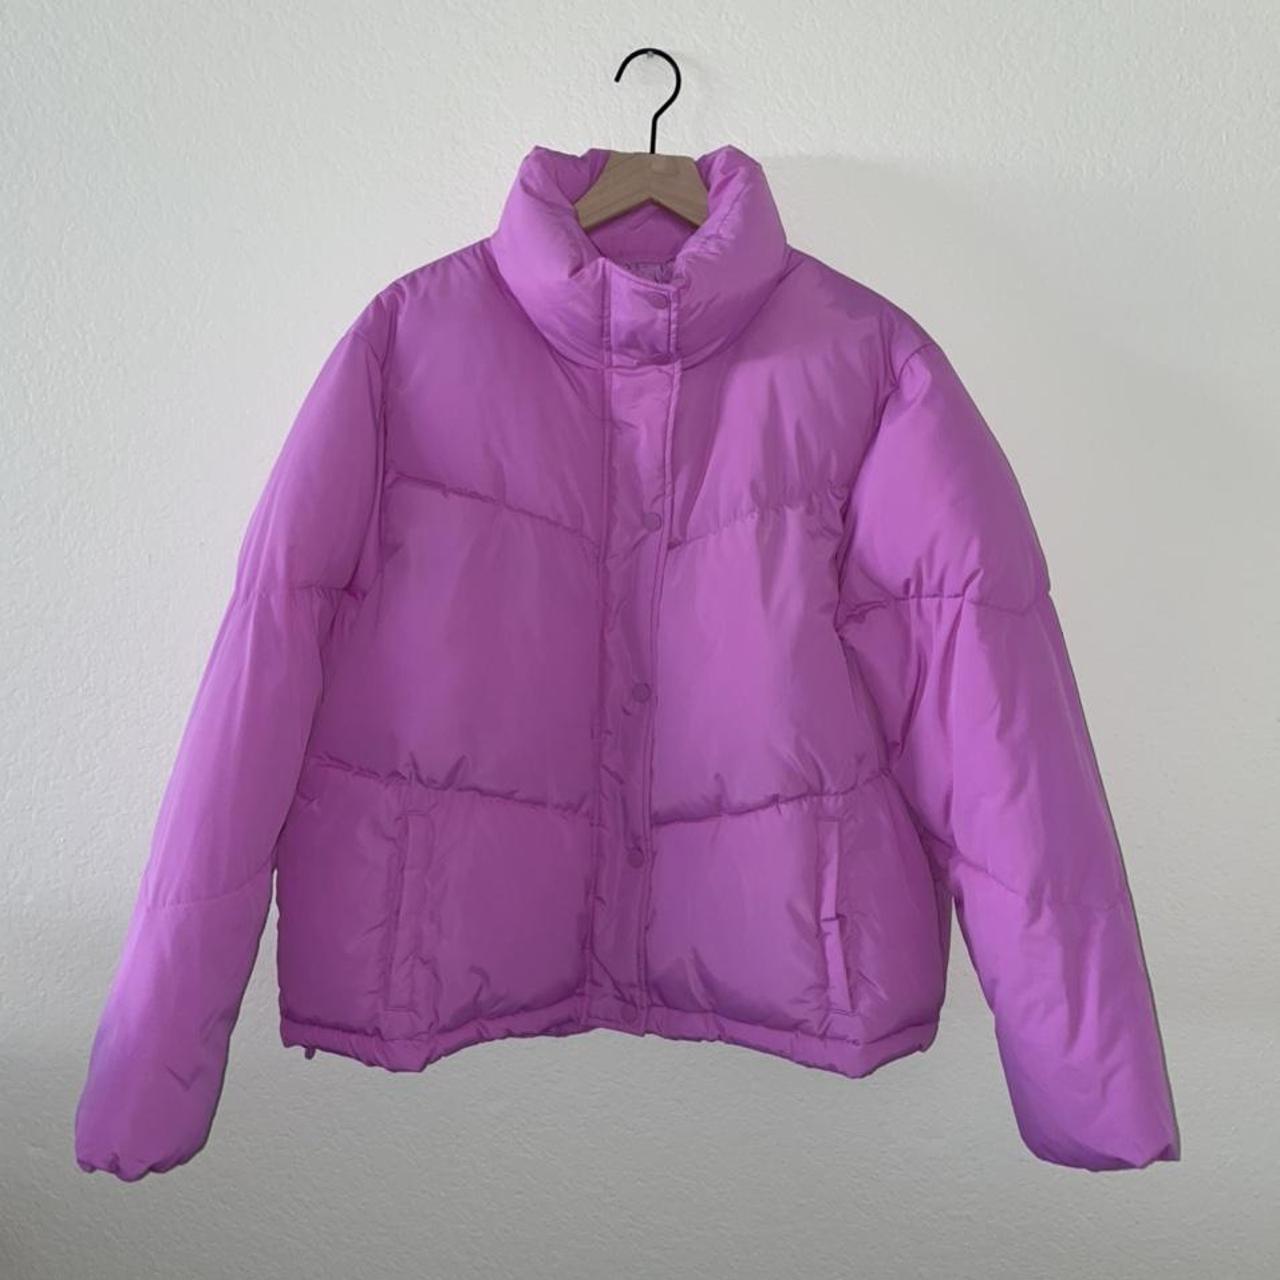 Wild Fable XXL cropped puffer - purple/pink color.... - Depop